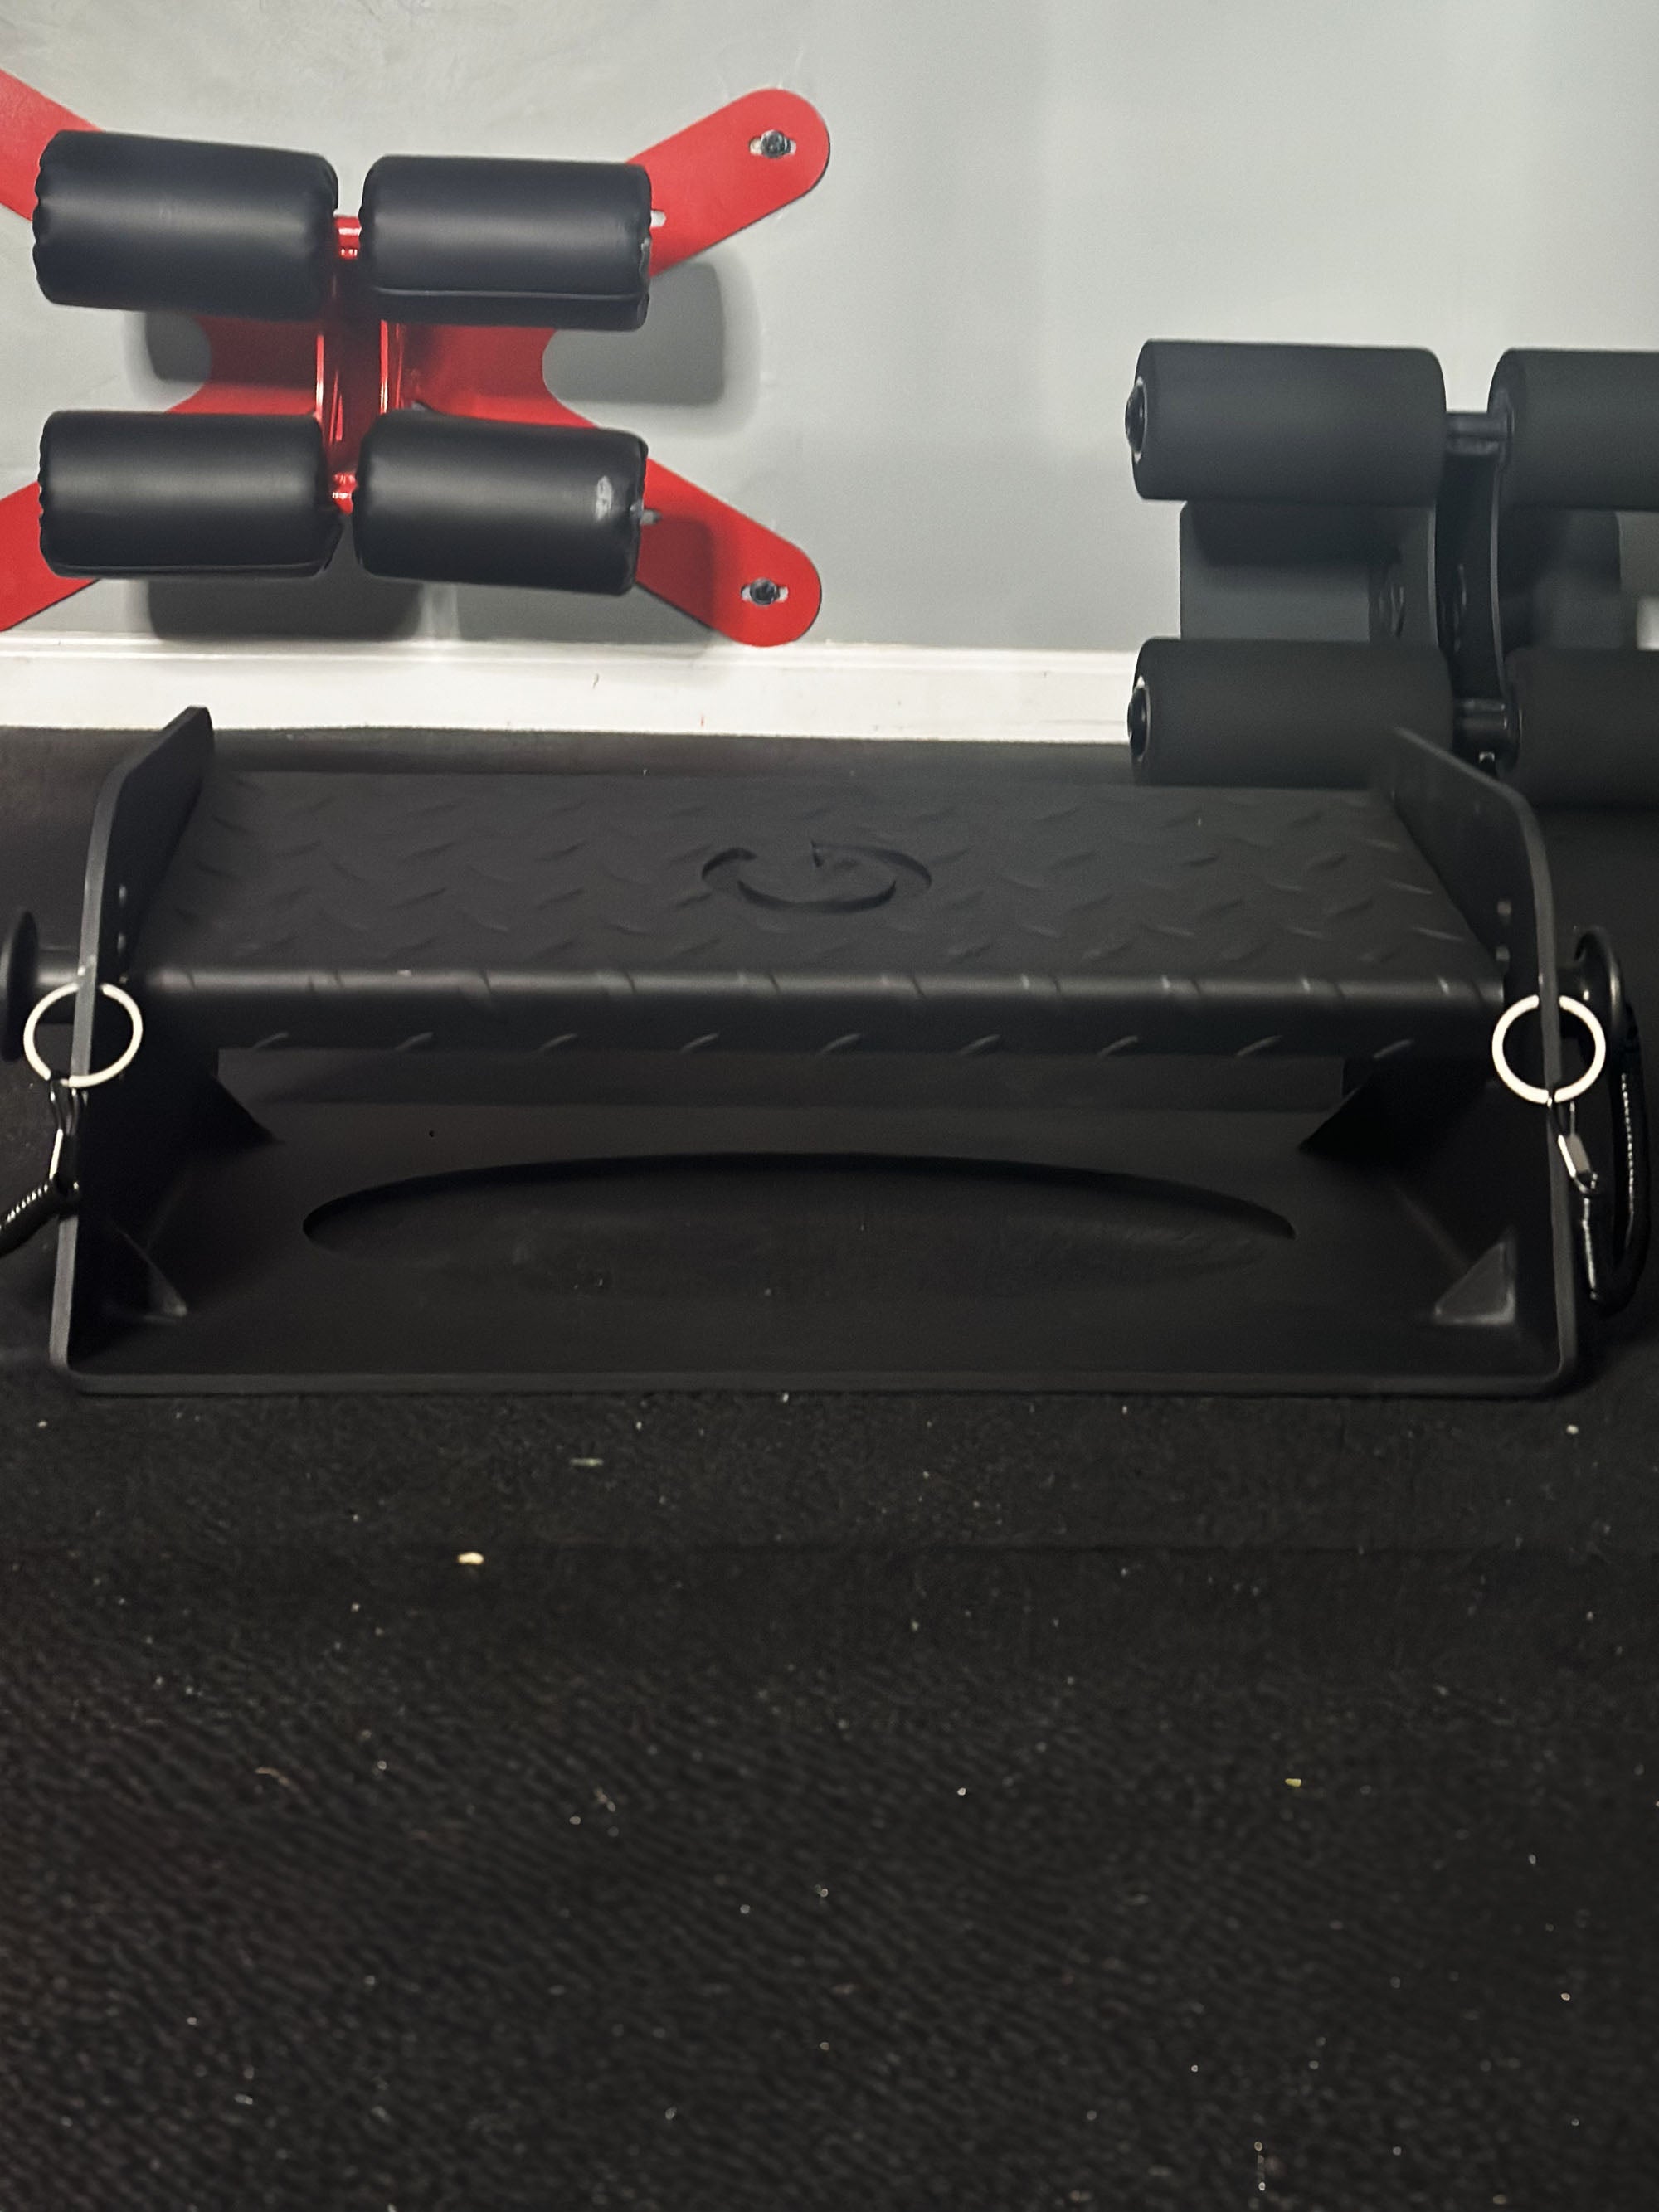 Front view of Adjustable calf raise block for full range of motion calf exercises